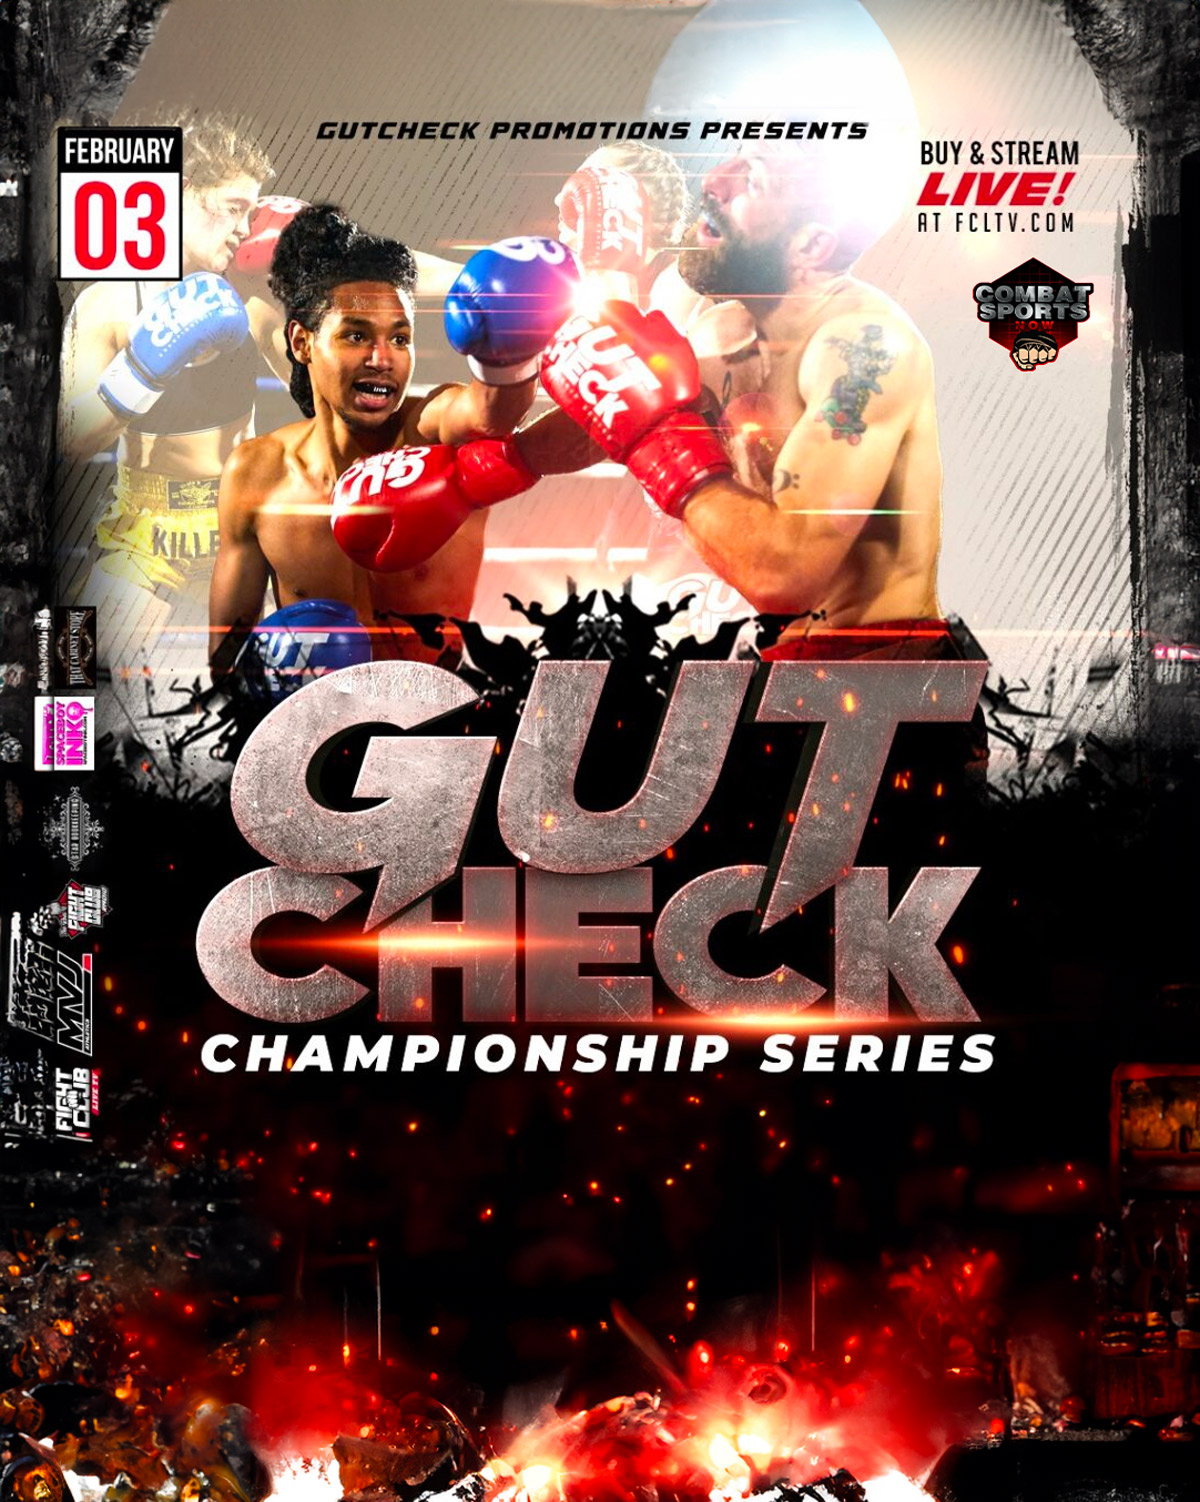 FCLTV Presents Gut Check Promotions Championship Series 2 Live on Combat Sports Now